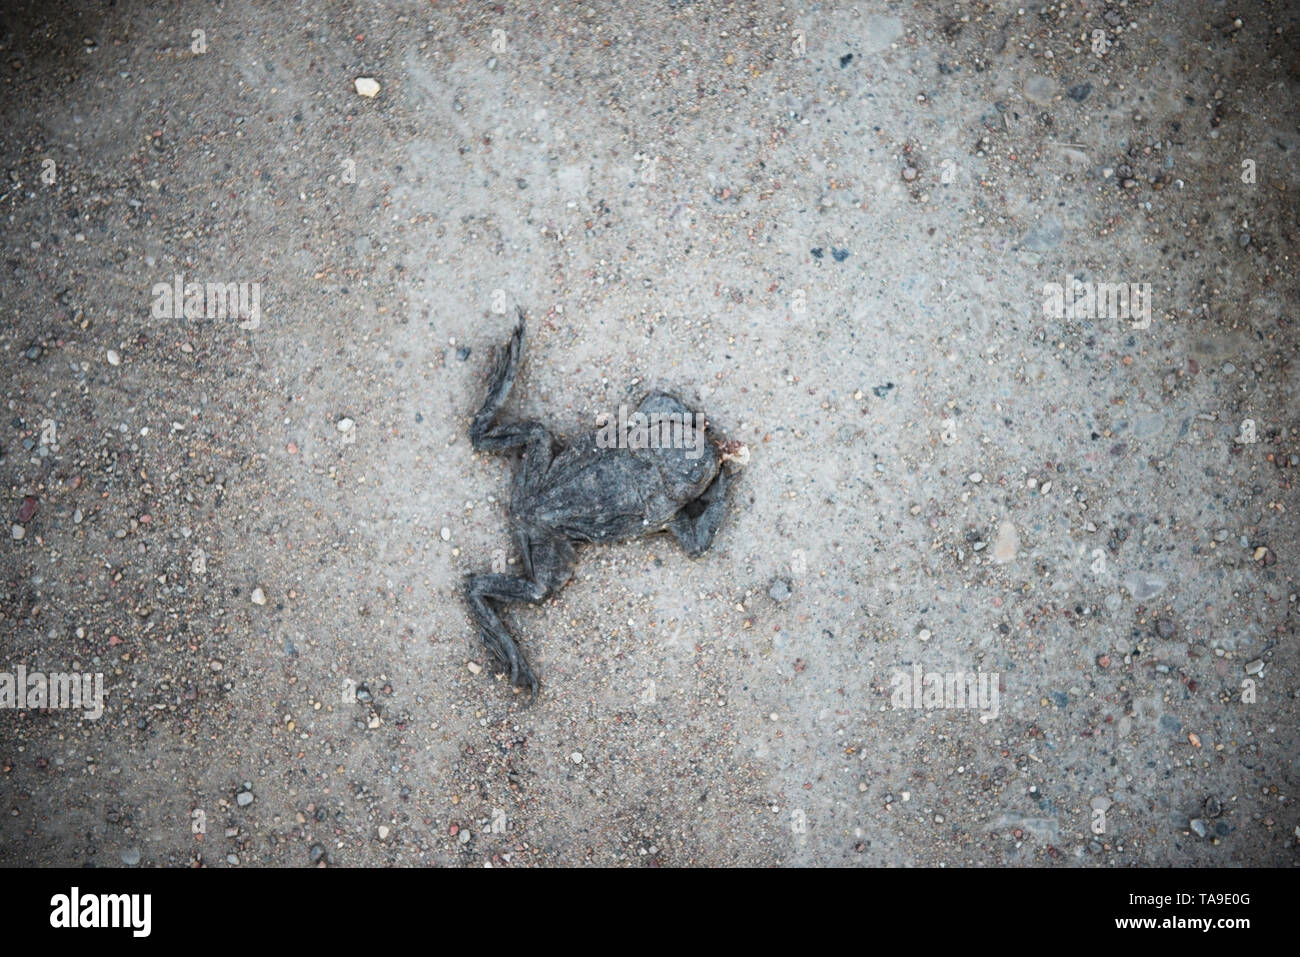 Toad died flat on the road. frog died on cement street. frog run over by a car on an road. car accident on the road. Stock Photo